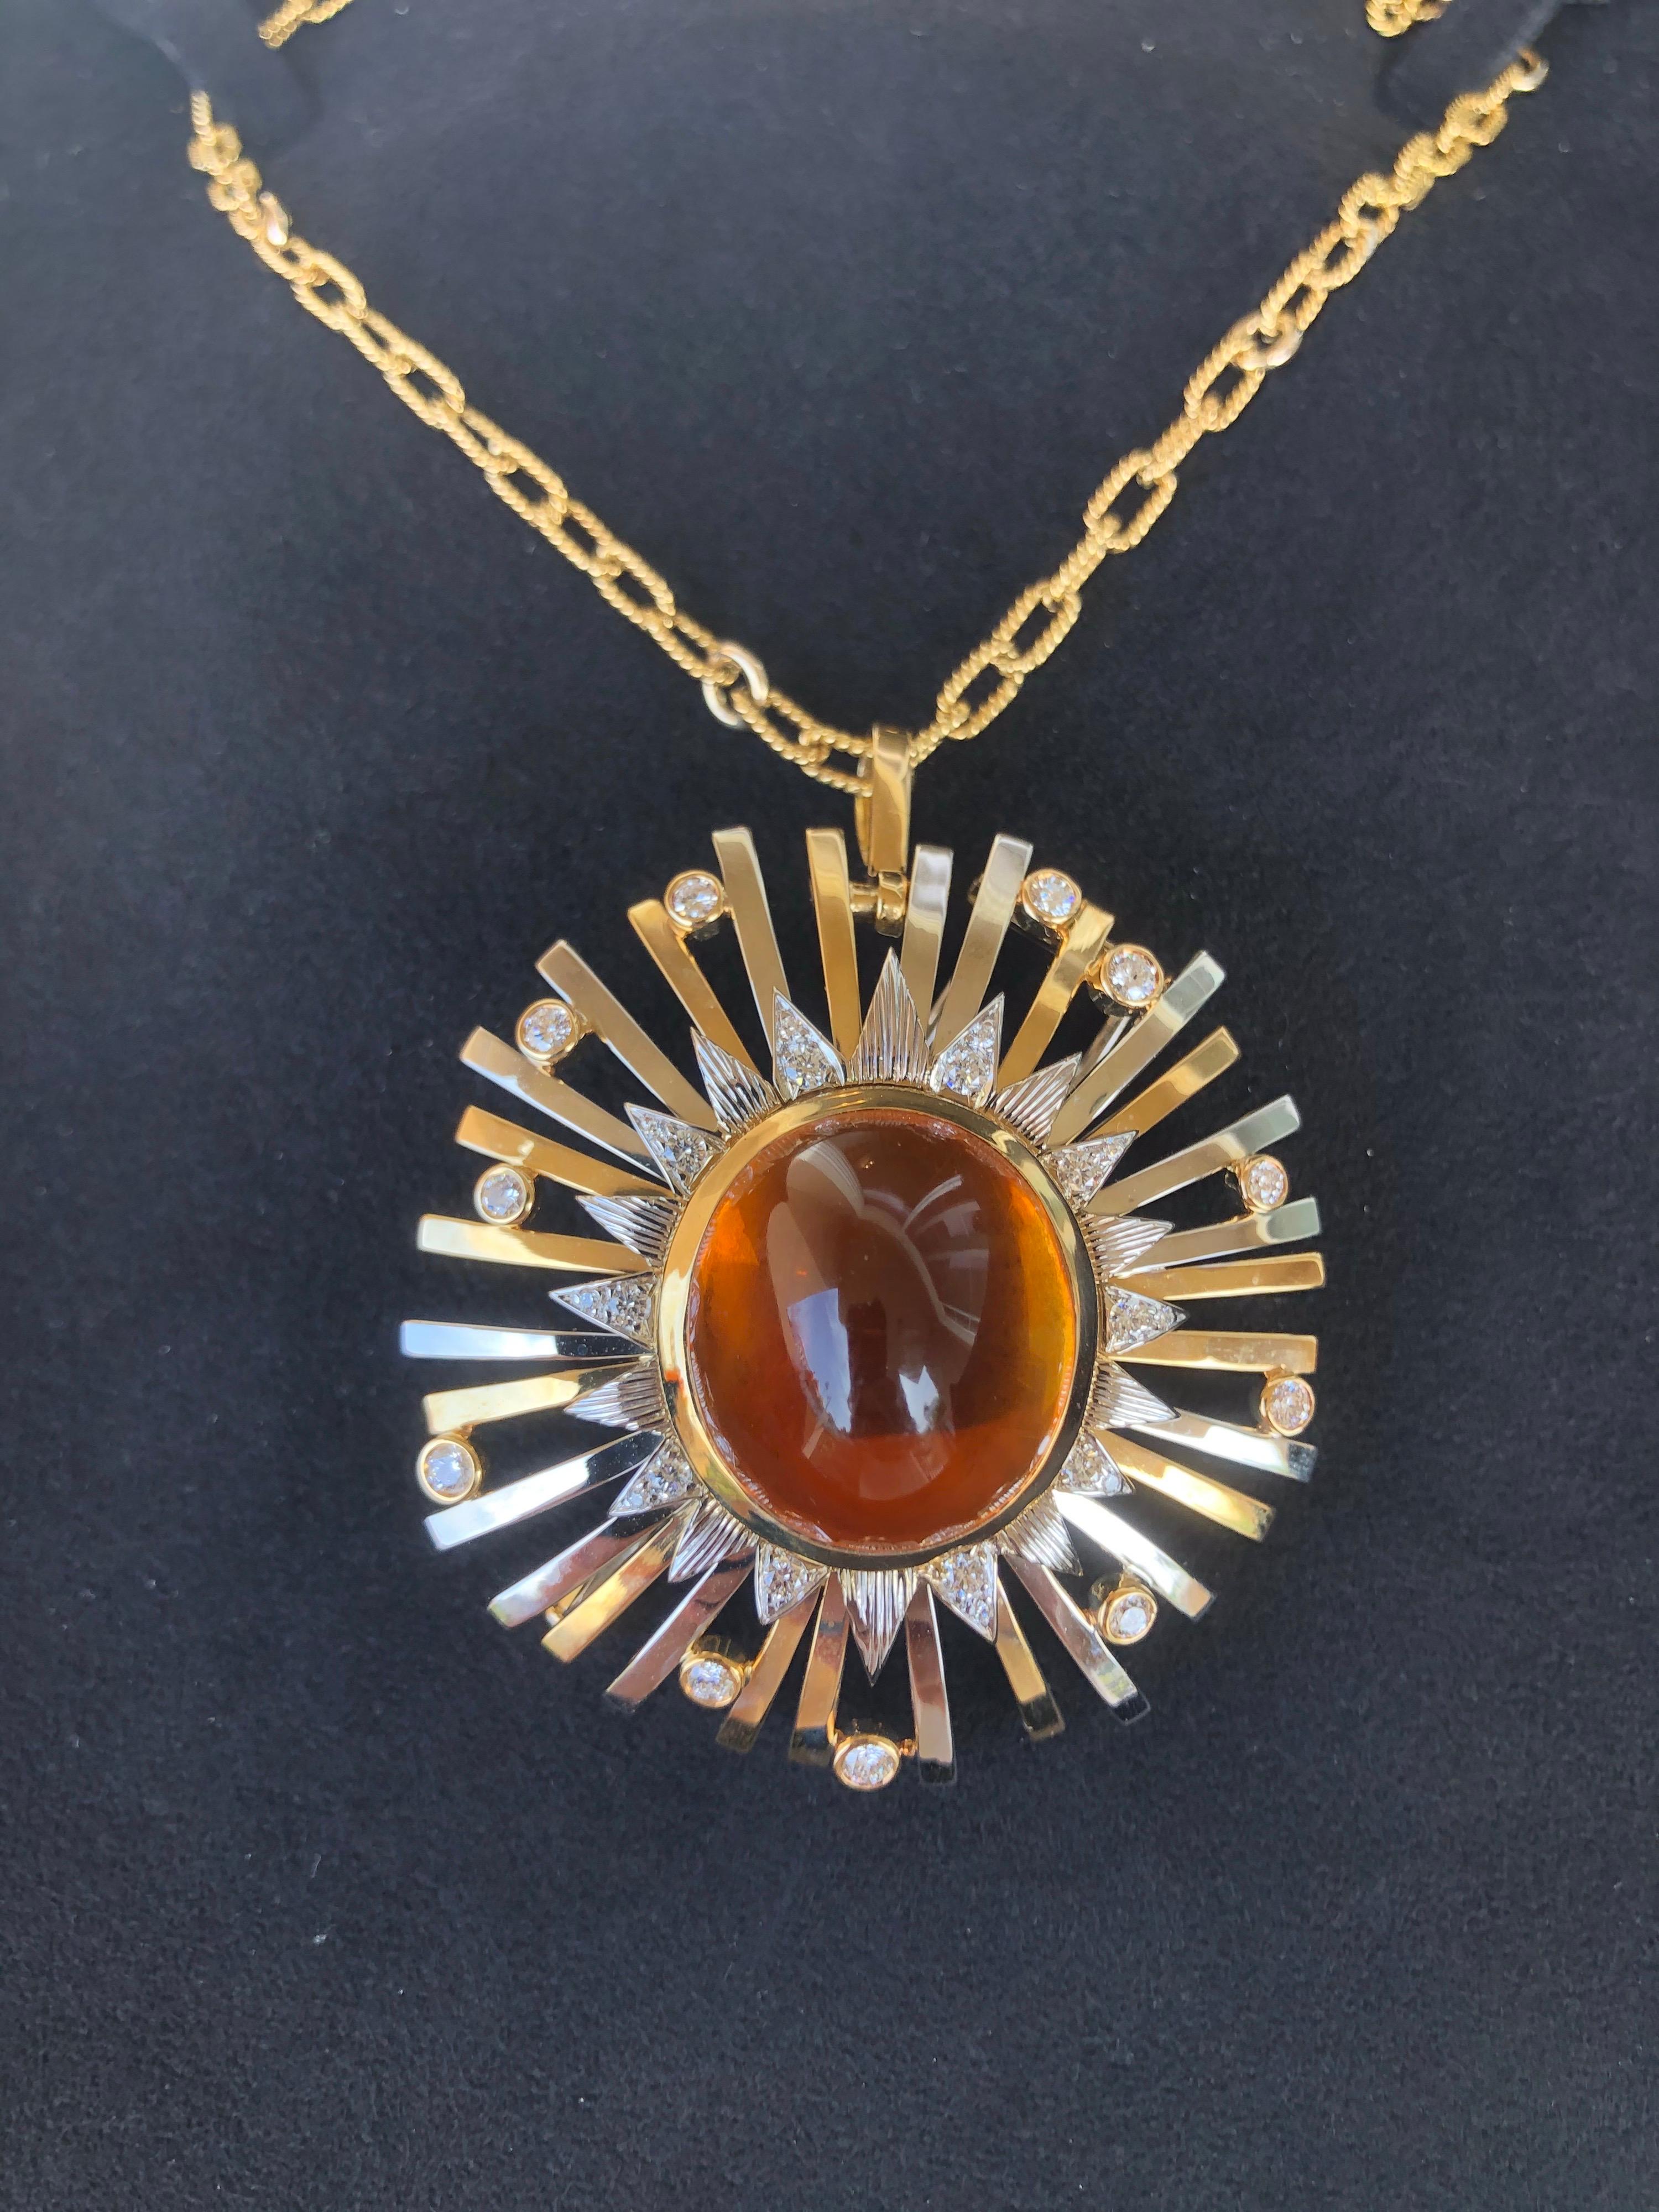 Madeira Citrine Cabochon 24.14 Carat Pendant Necklace Brooch For Sale 11